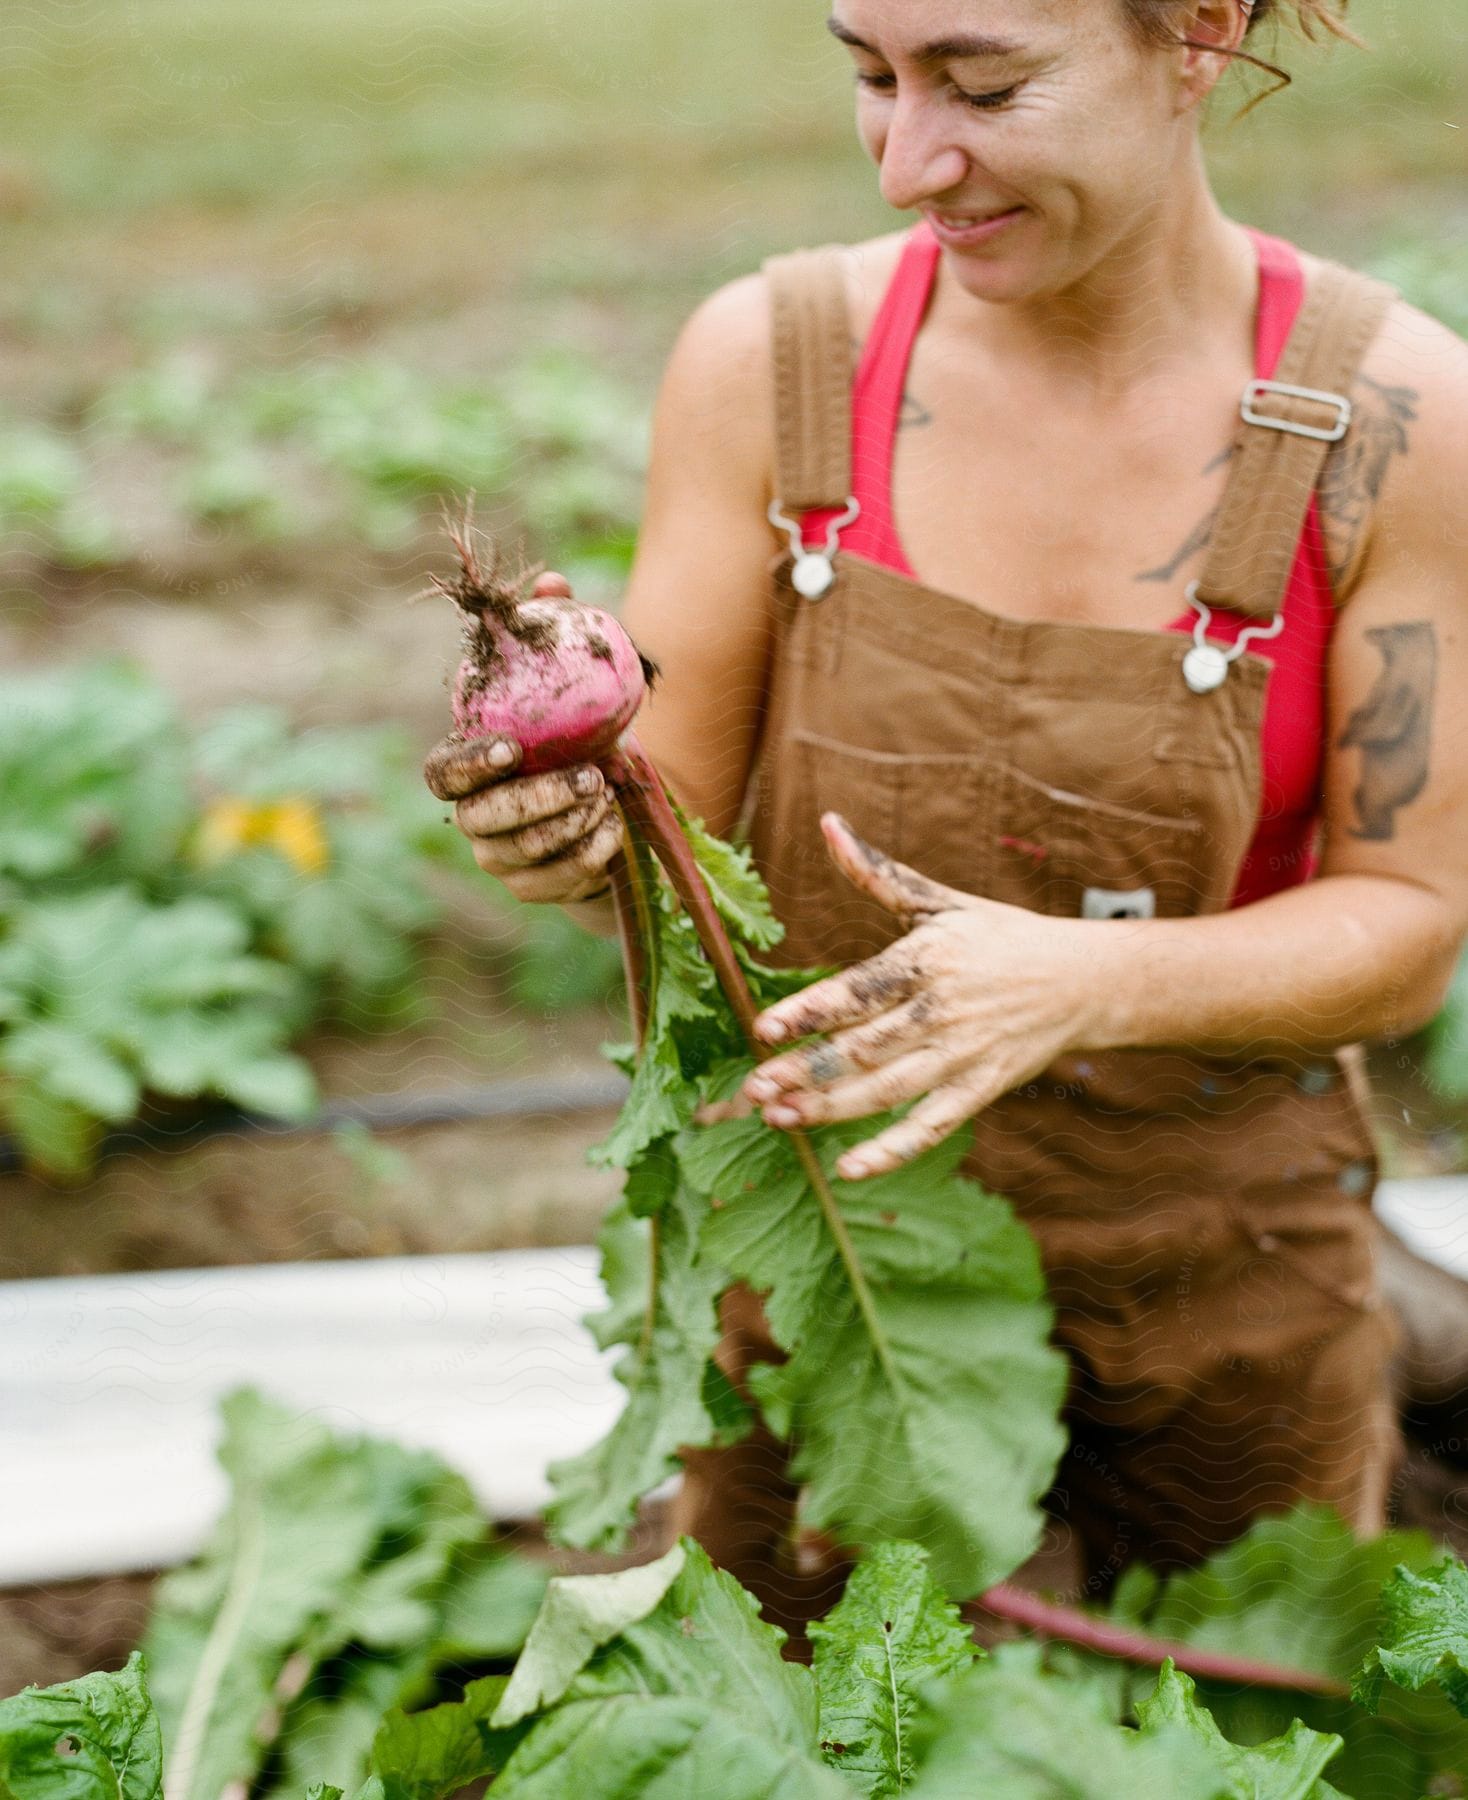 A woman stands in a garden smiling as she holds a turnip